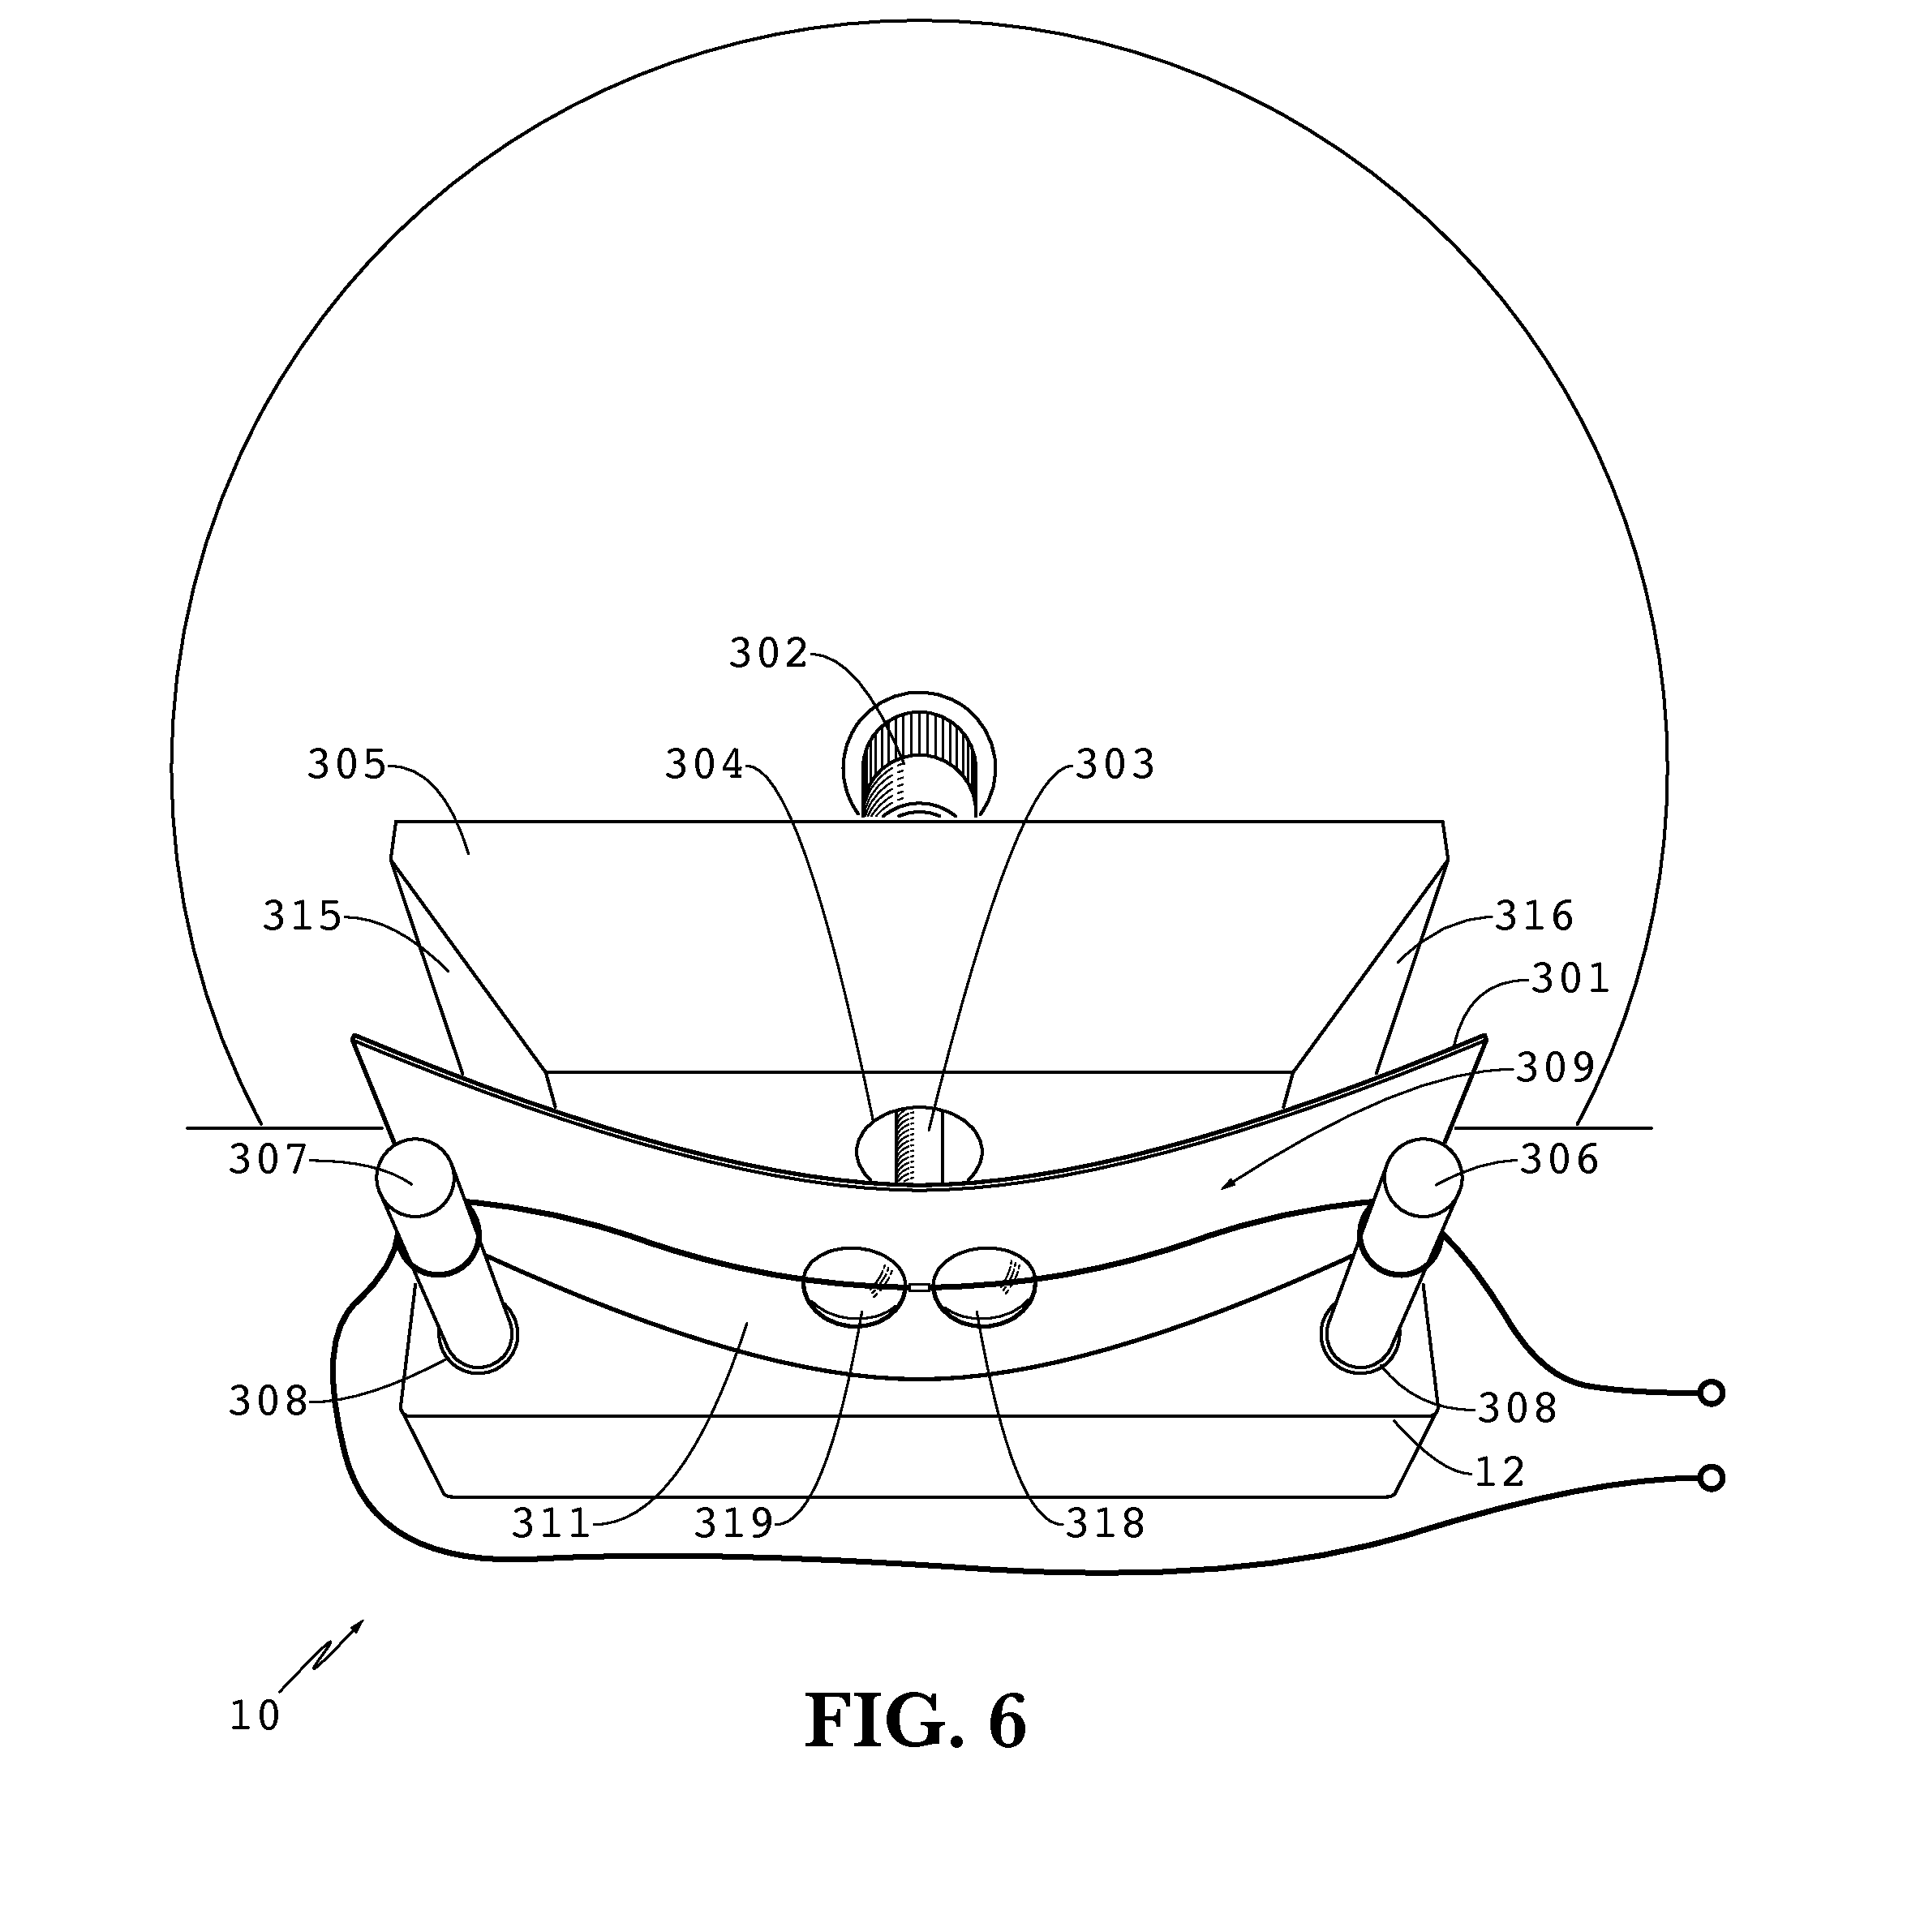 Apparatus and method for demonstrating quantized conductance